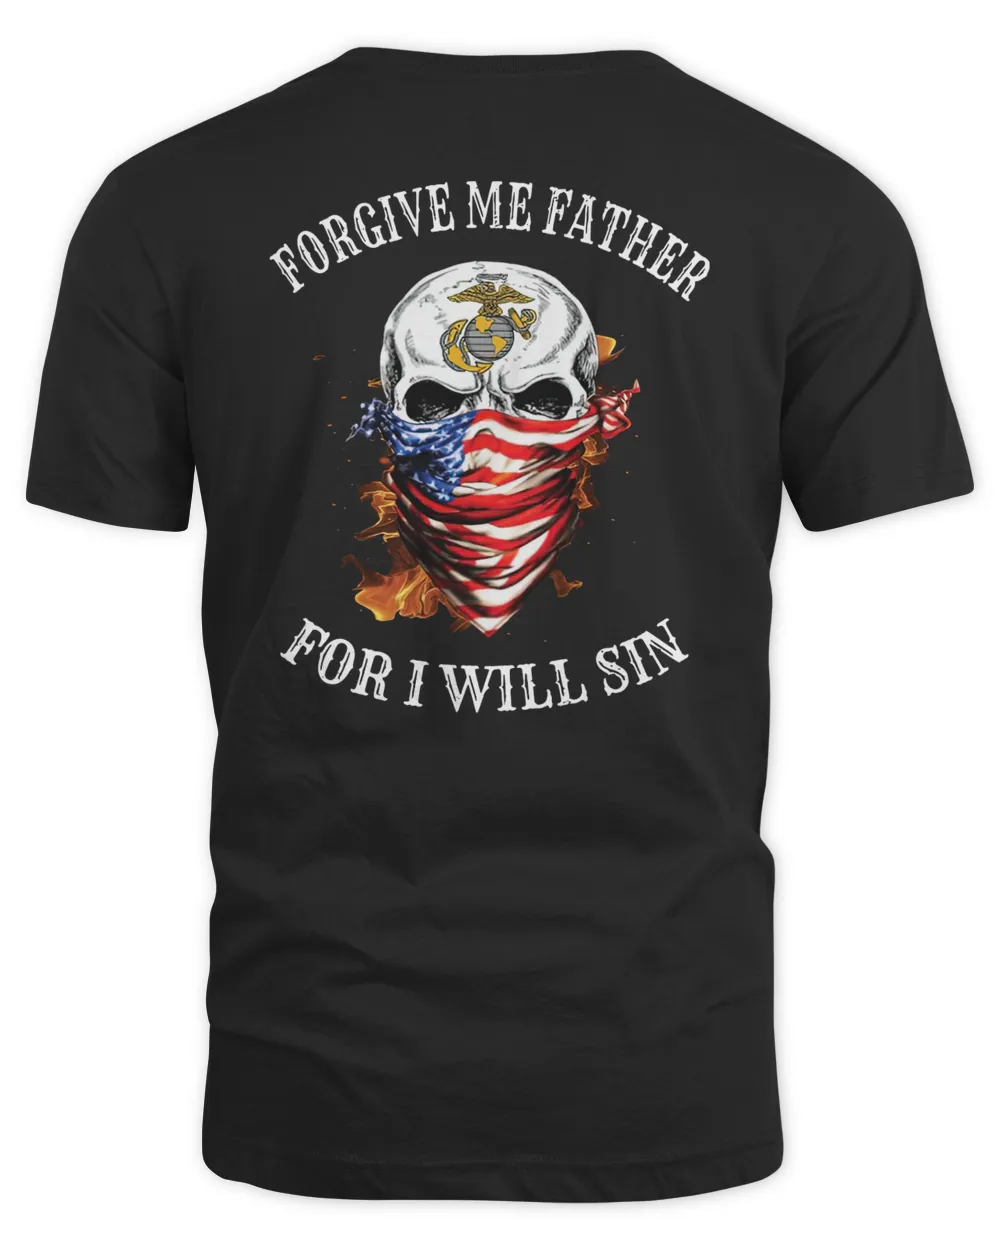 US Marine Corps Skull Forgive me father For I will sin shirt